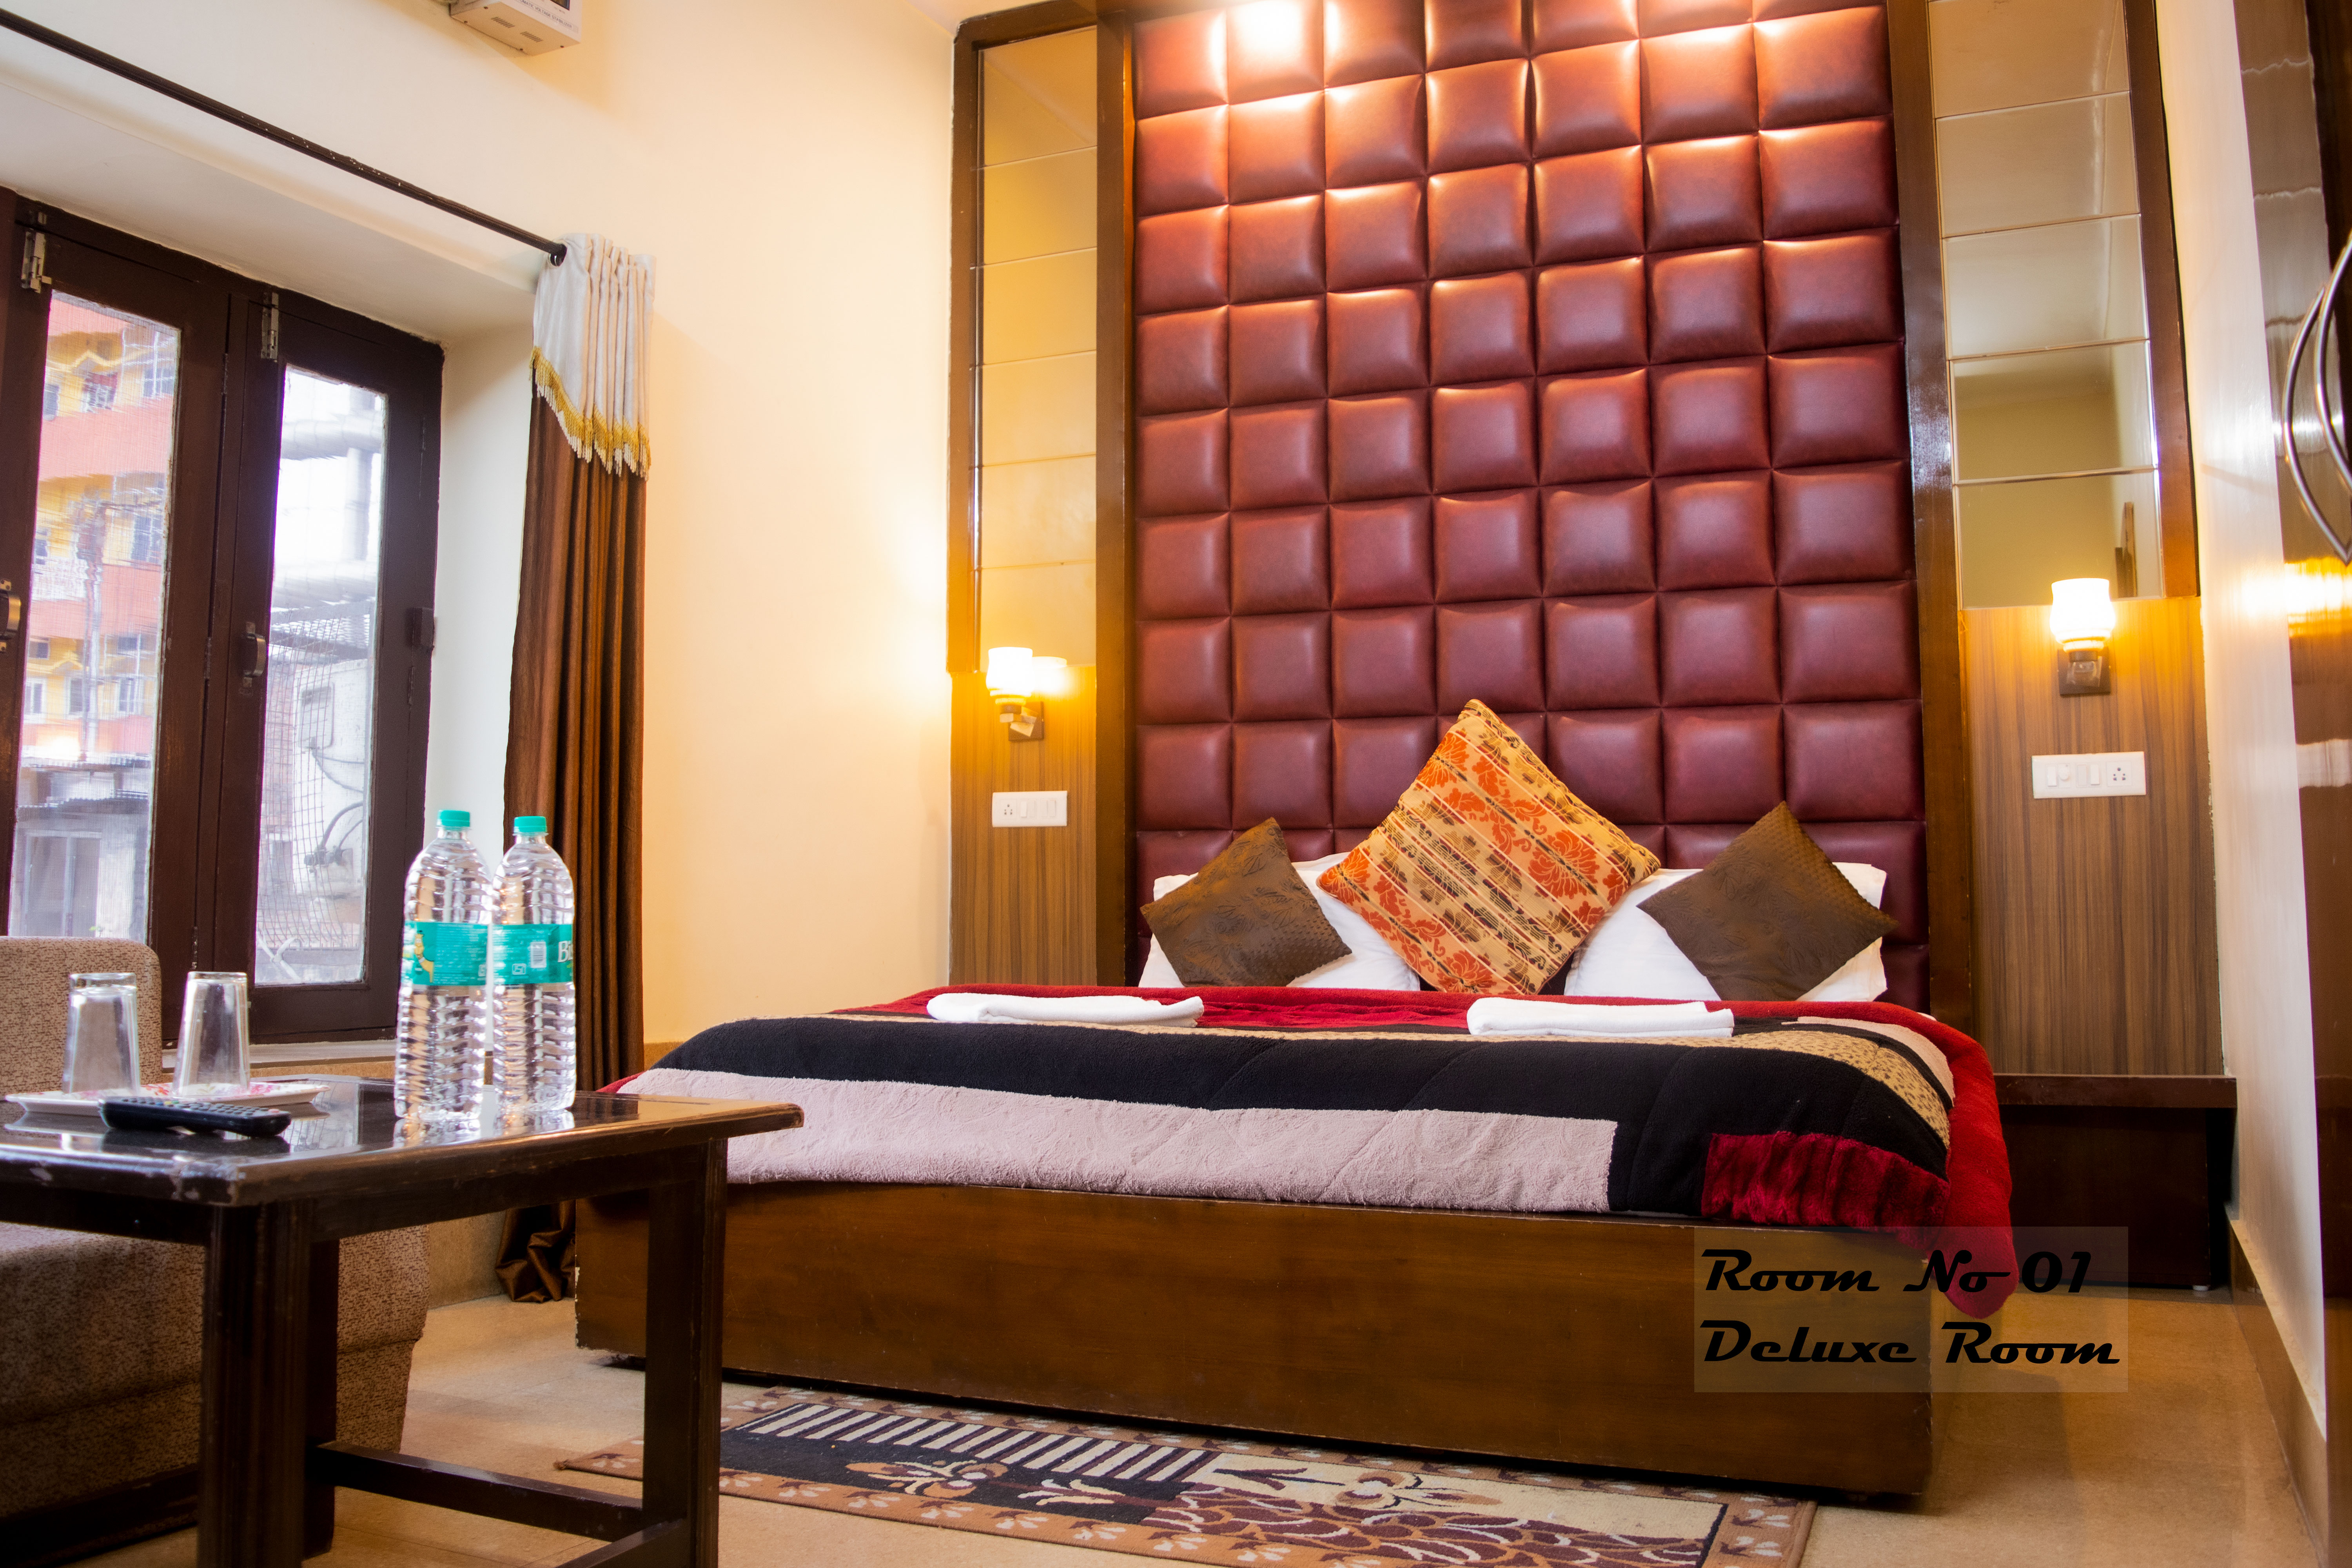 deluxe room 01 , hotel at haridwar